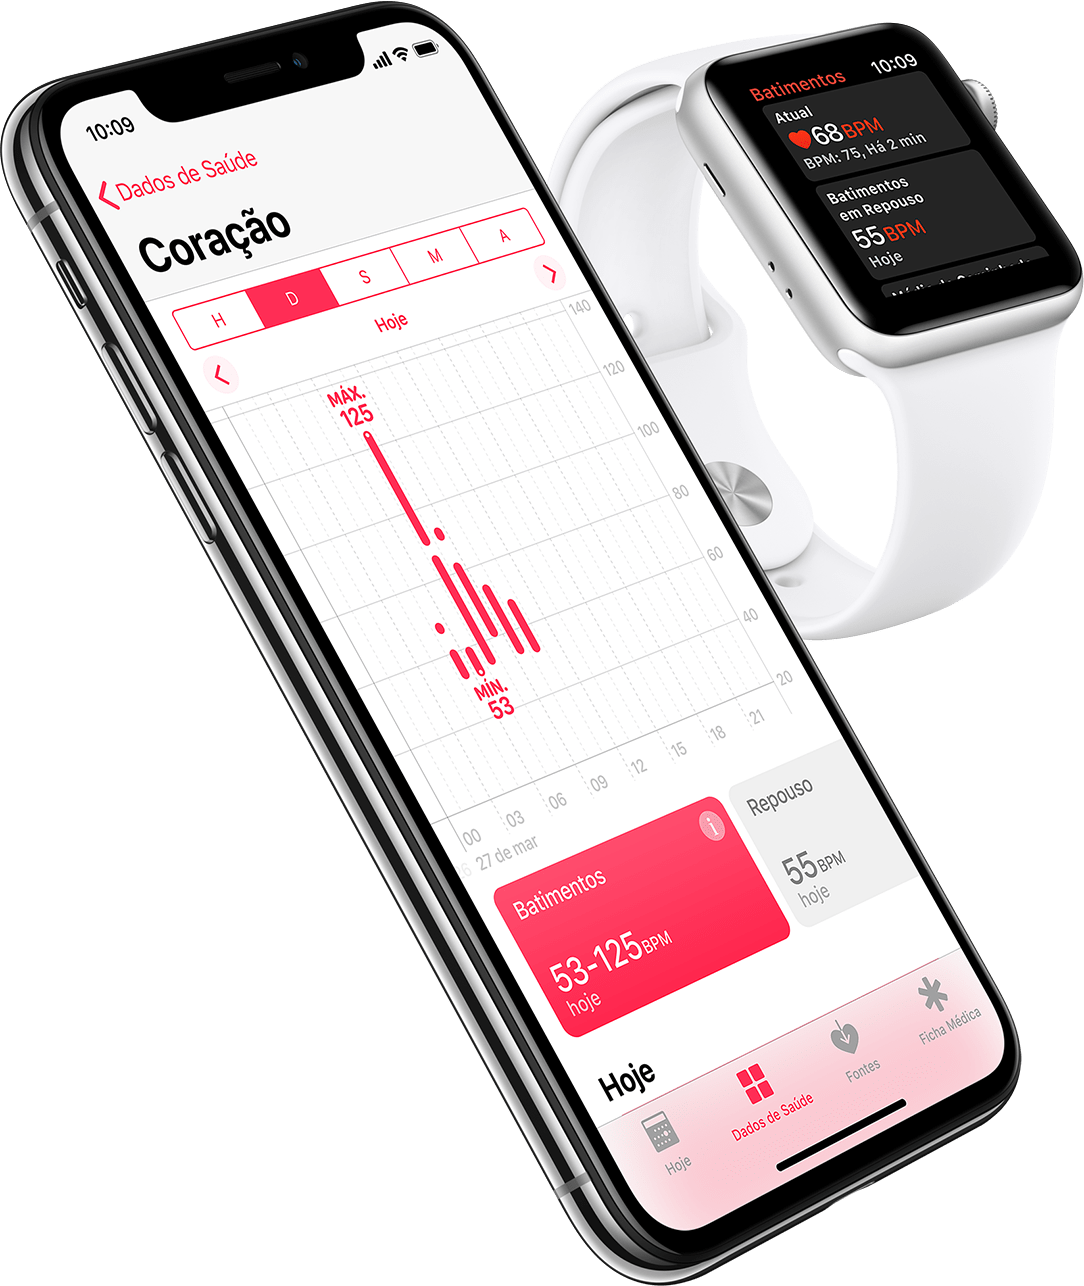 Apple sued for infringing patents on Watch's heart monitor